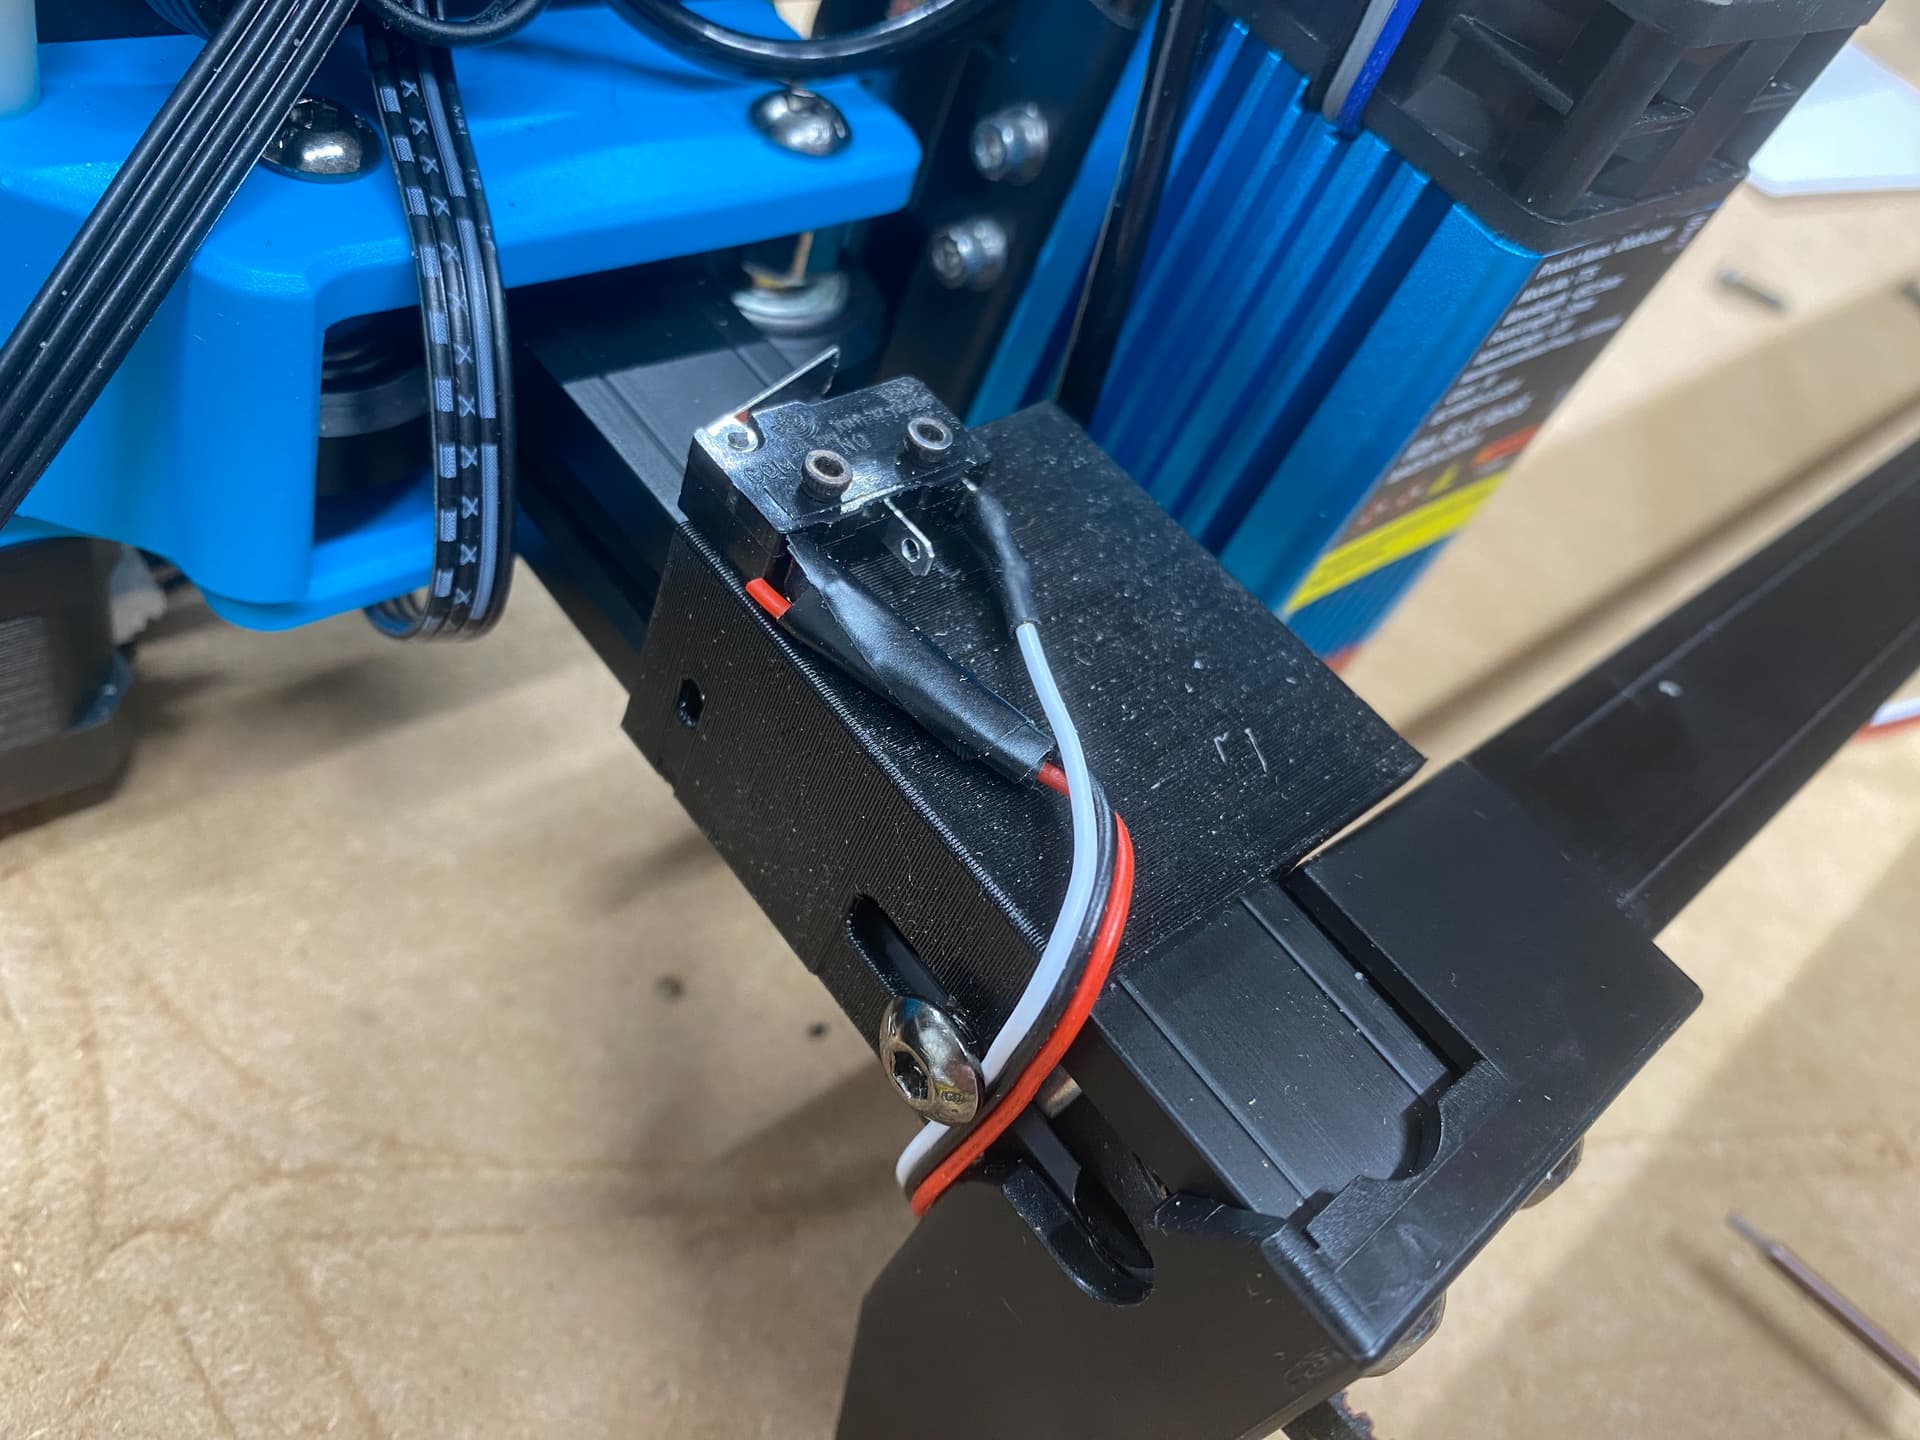 How to add end stop switches to TwoTrees TTS-55 laser engraver